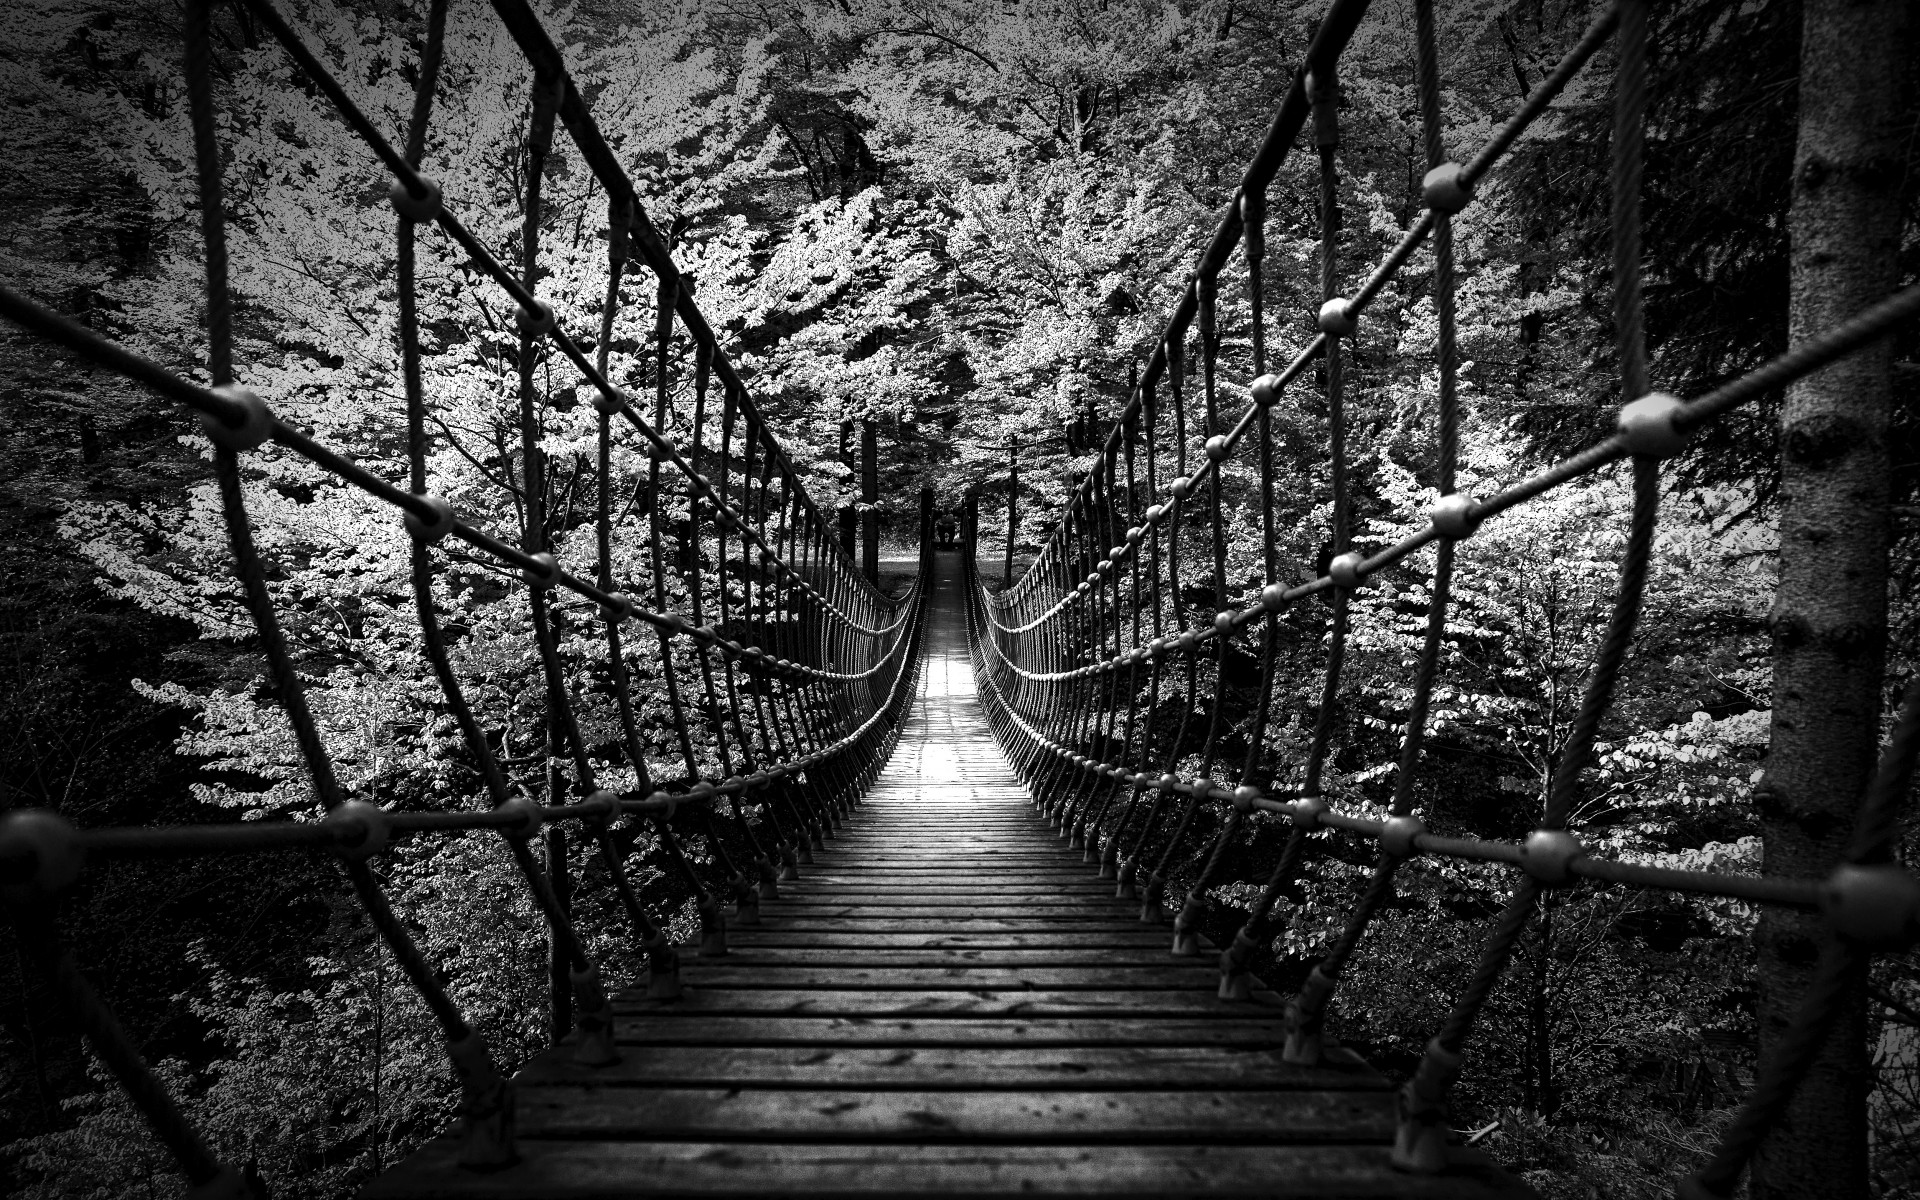 1920x1200 Monochrome black white b/w landscapes nature wood rope scary bridges trees  forest photography architecture wallpaper |  | 24592 | WallpaperUP